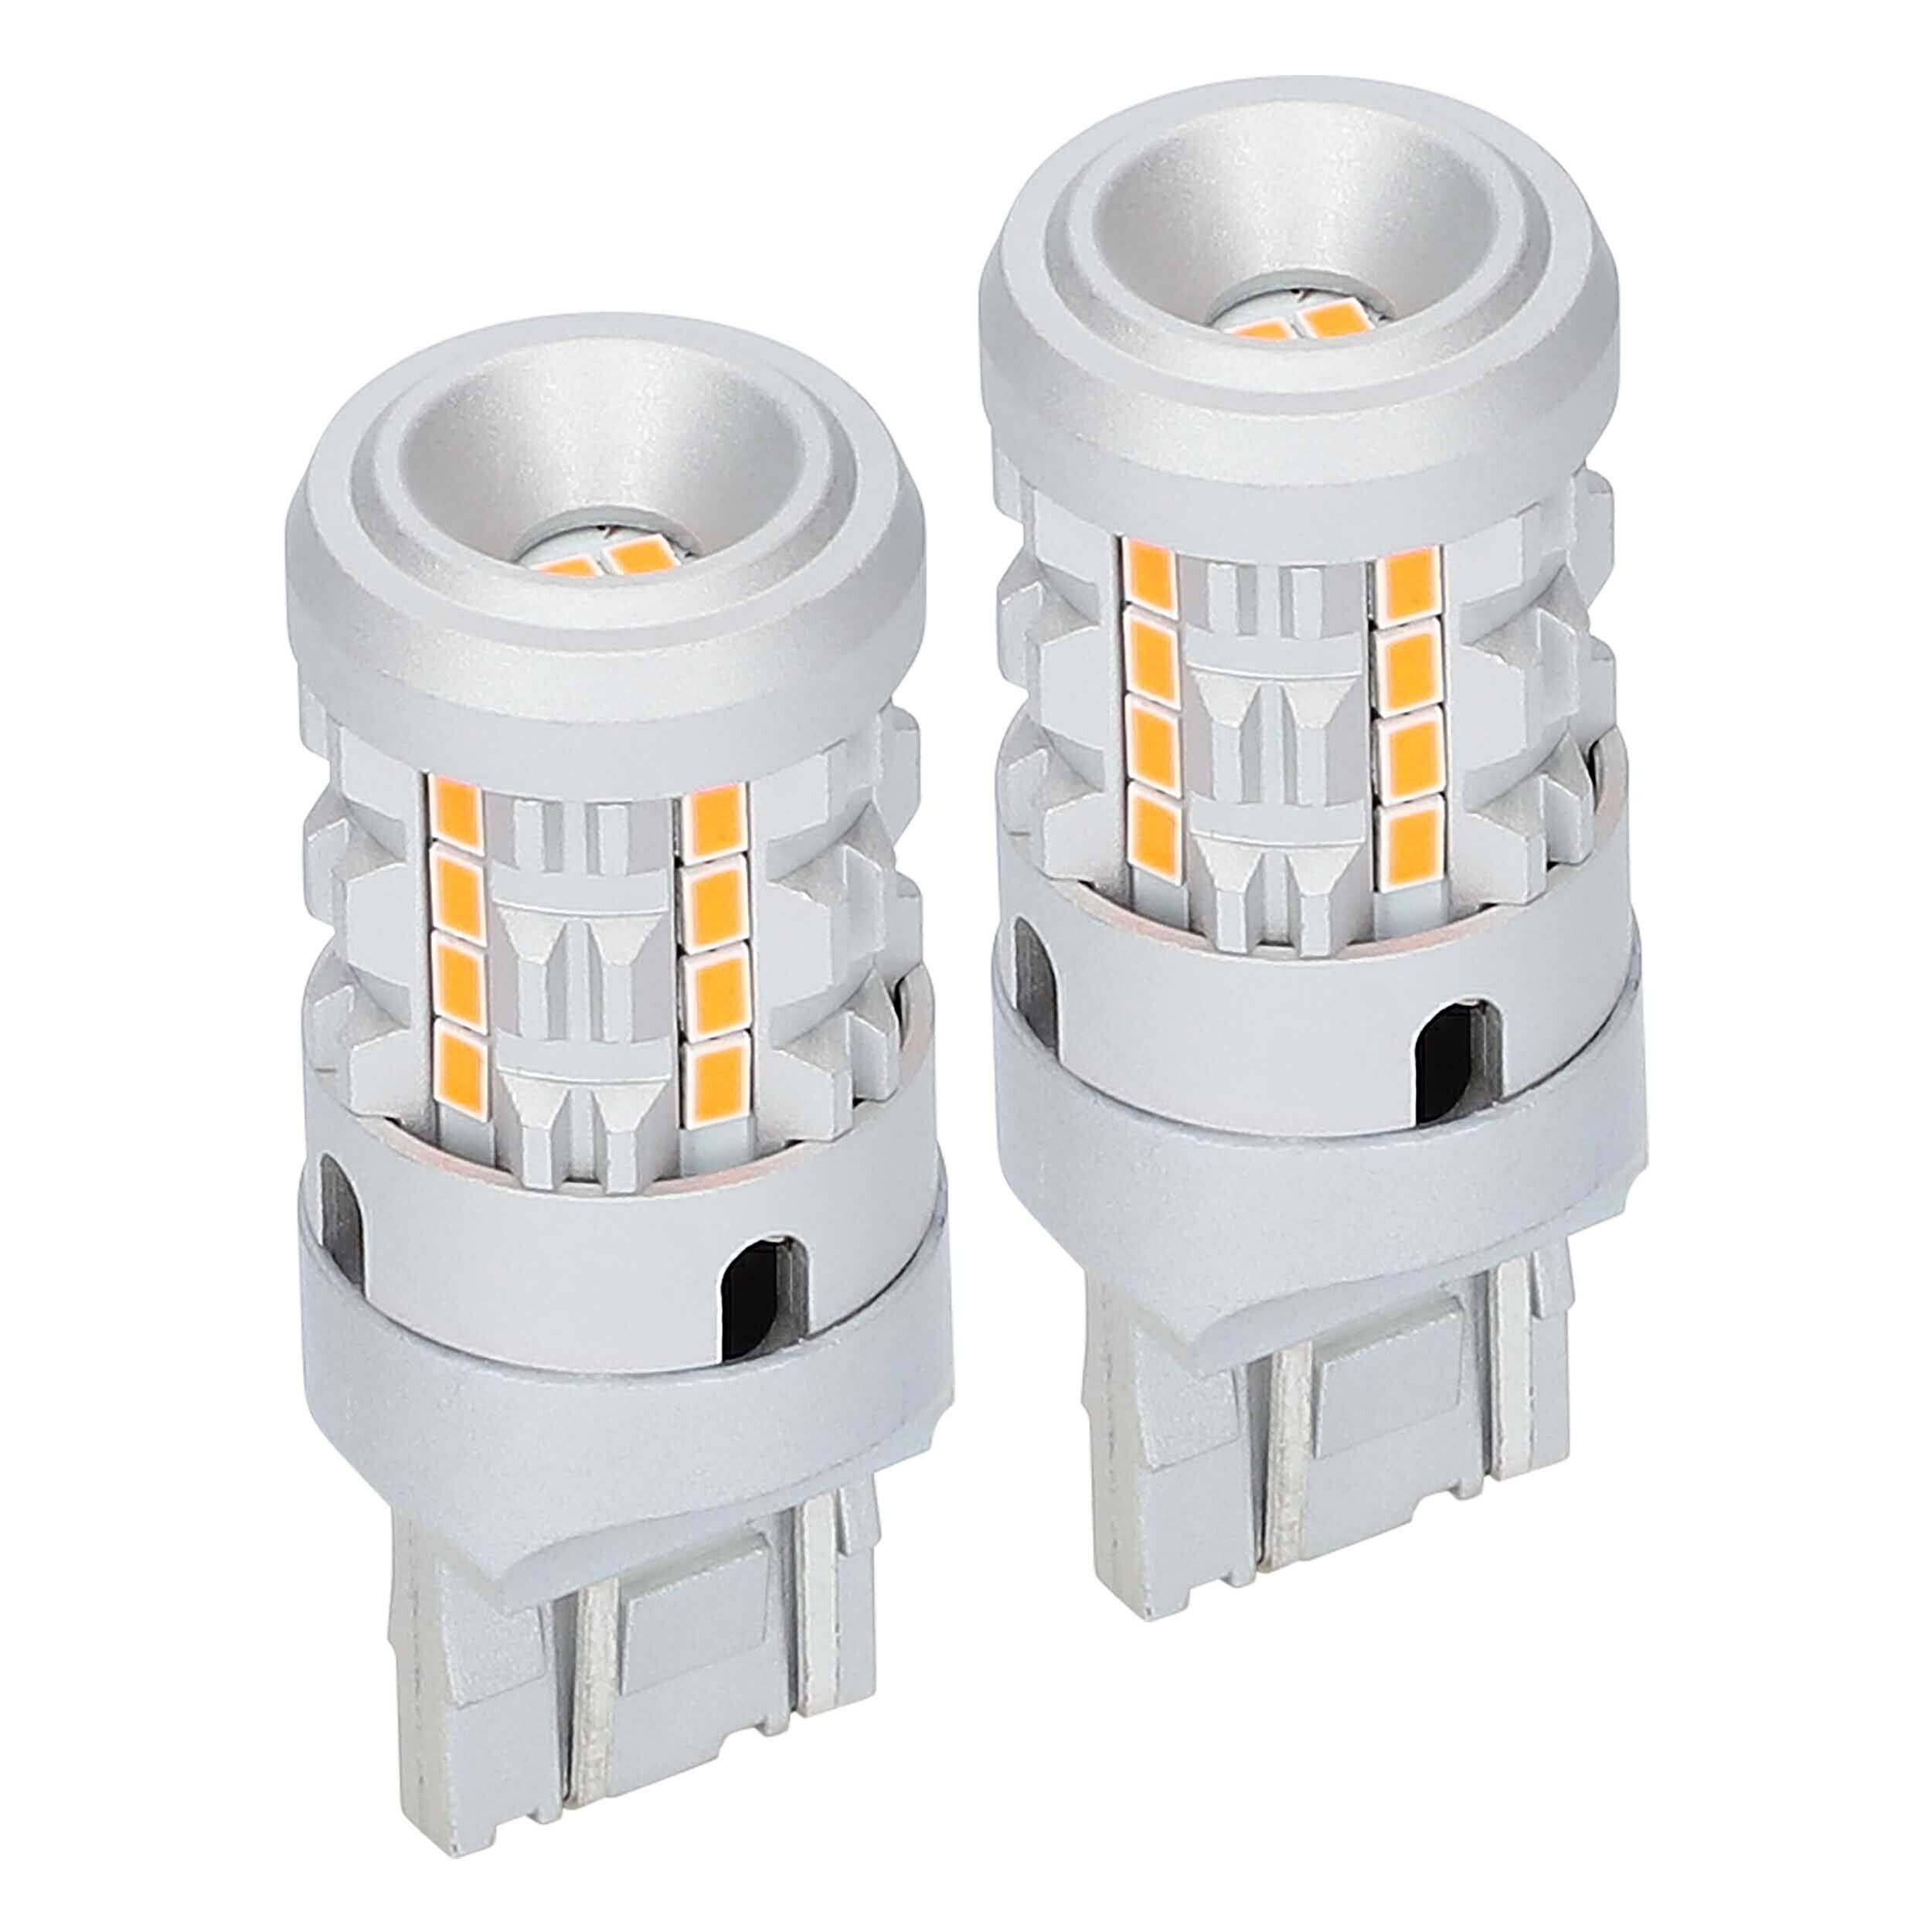 7443 Amber Bulbs with Integrated Internal CANBUS System - 2-Pack